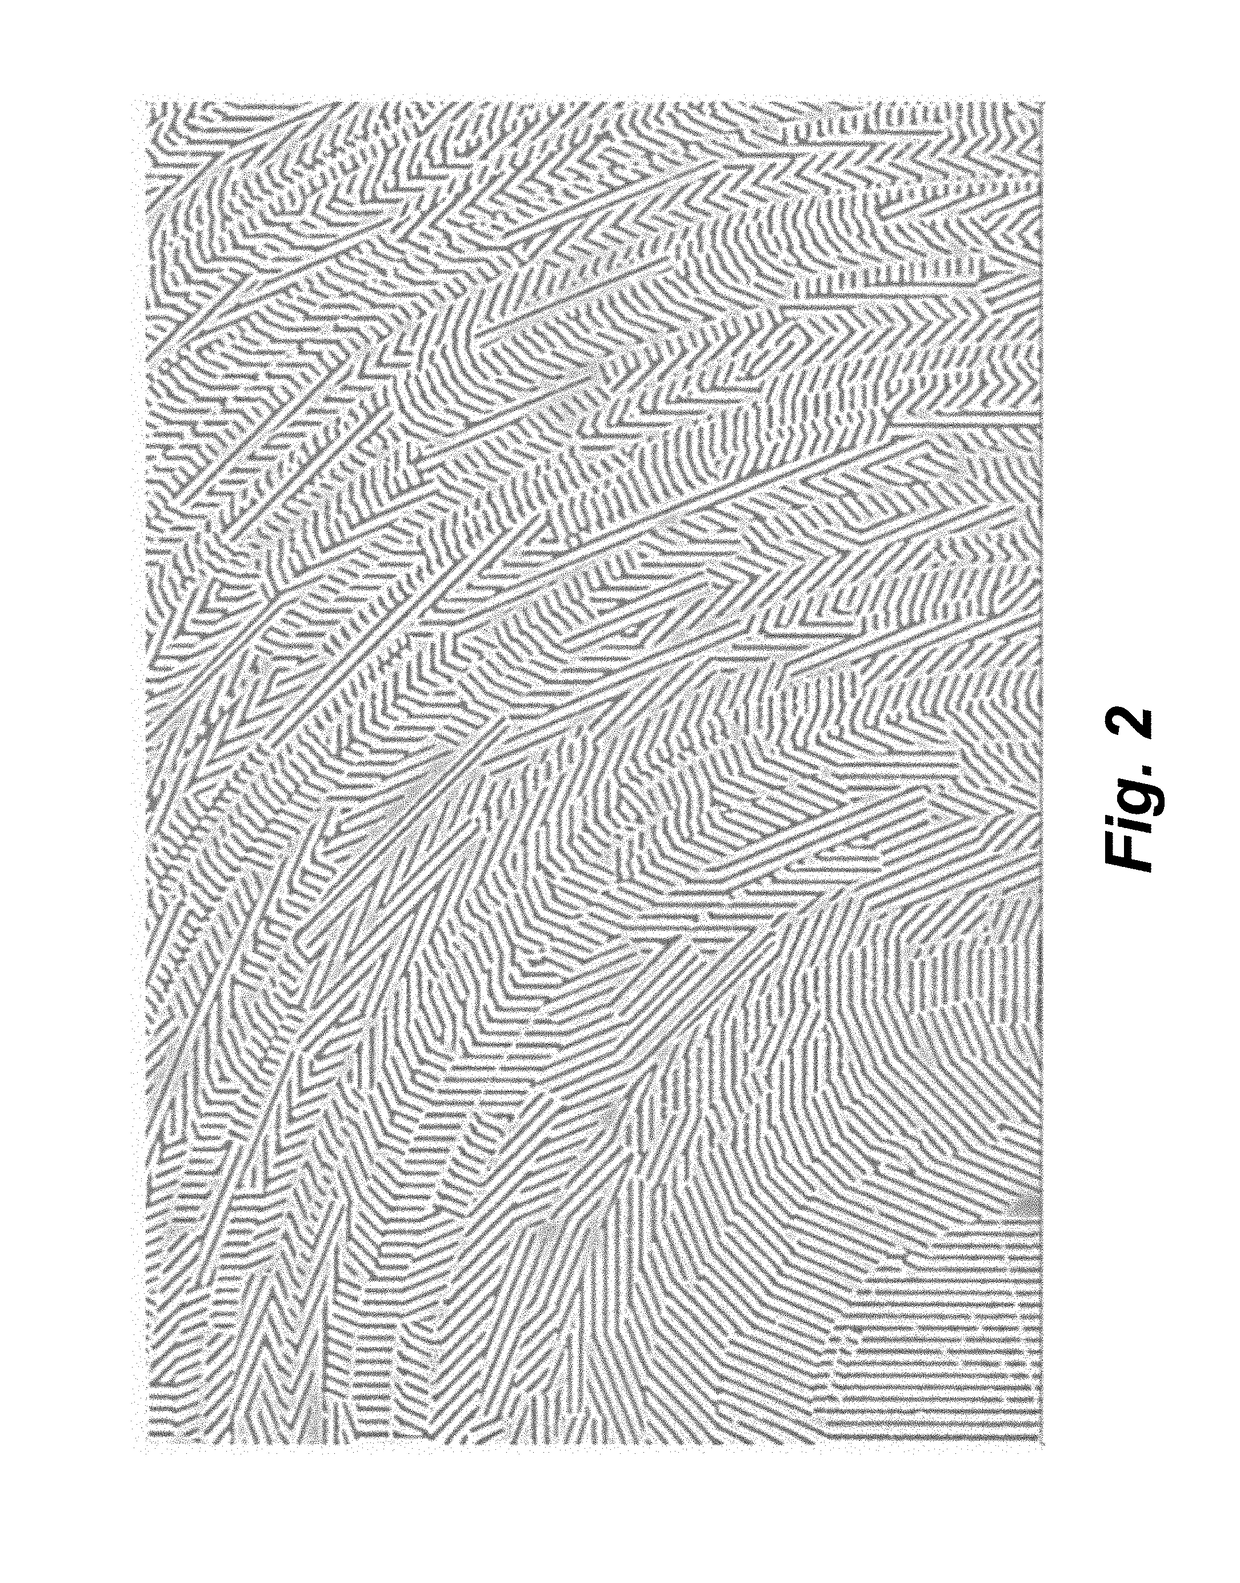 Spatially Multiplexed Dielectric Metasurface Optical Elements